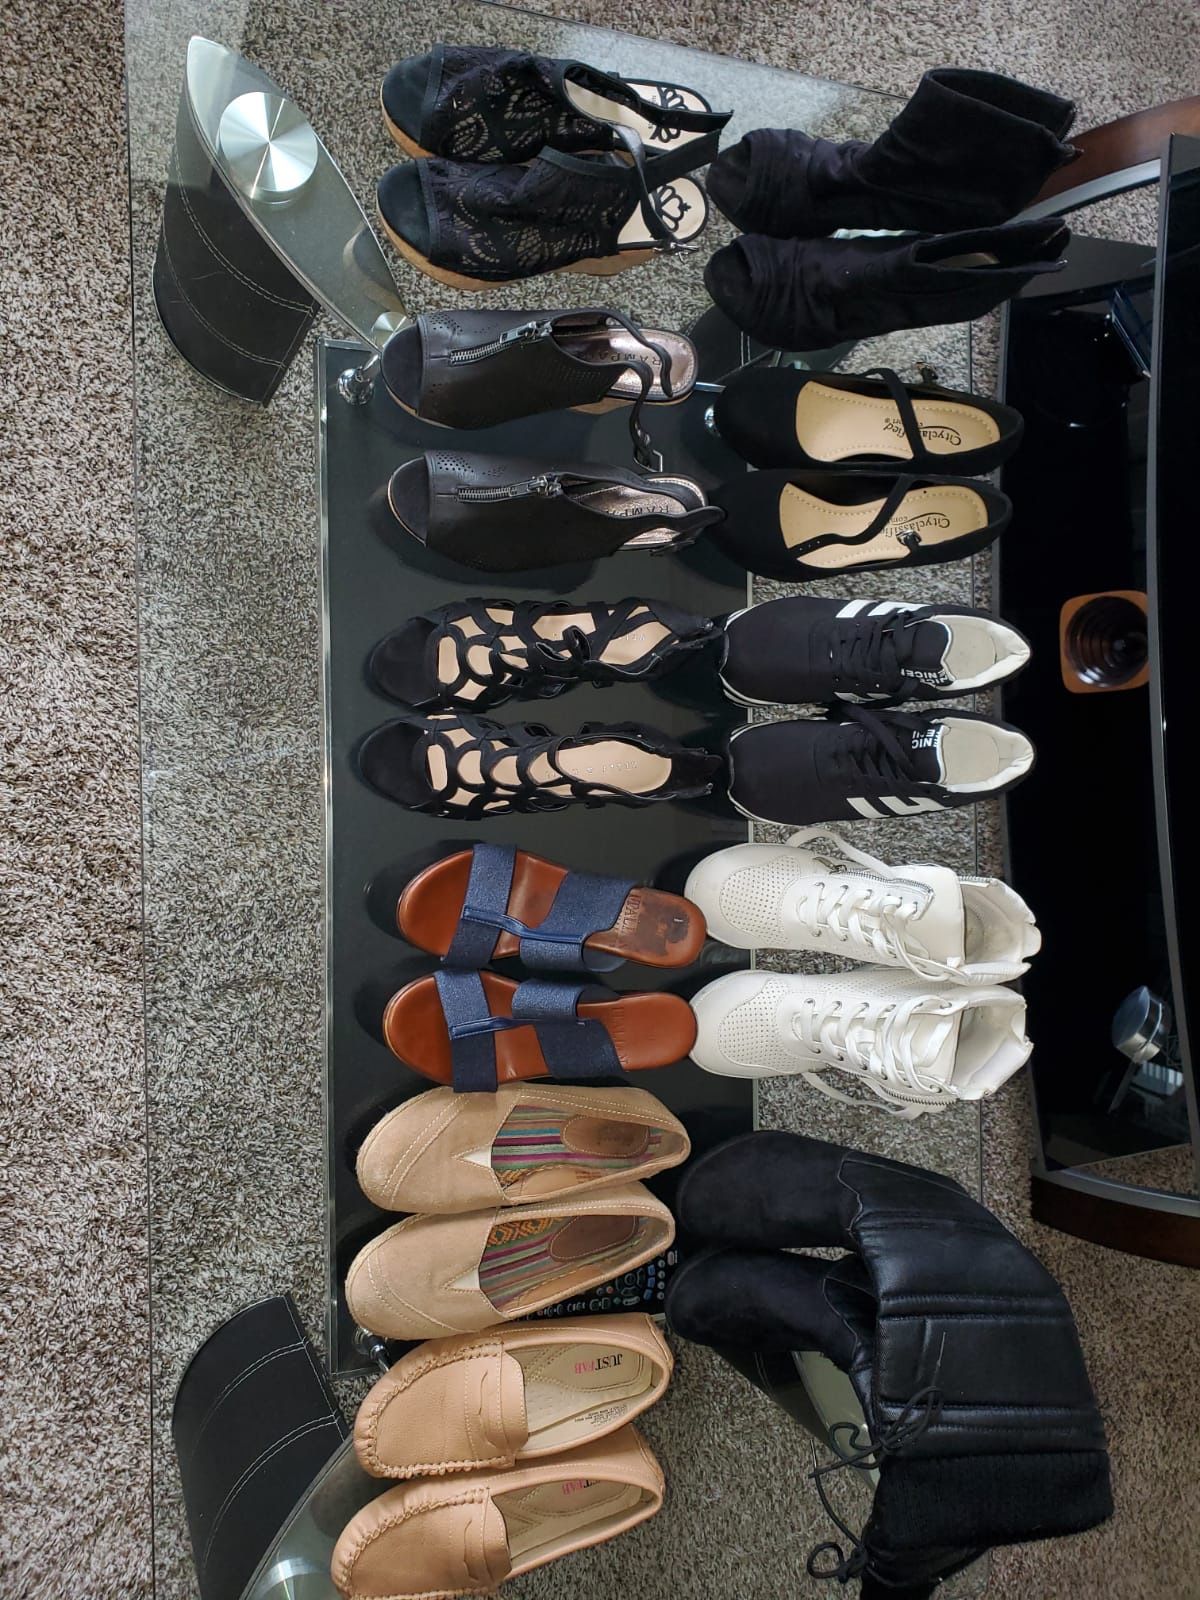 Size 6 women’s shoes all for $100 plus another pair not in picture